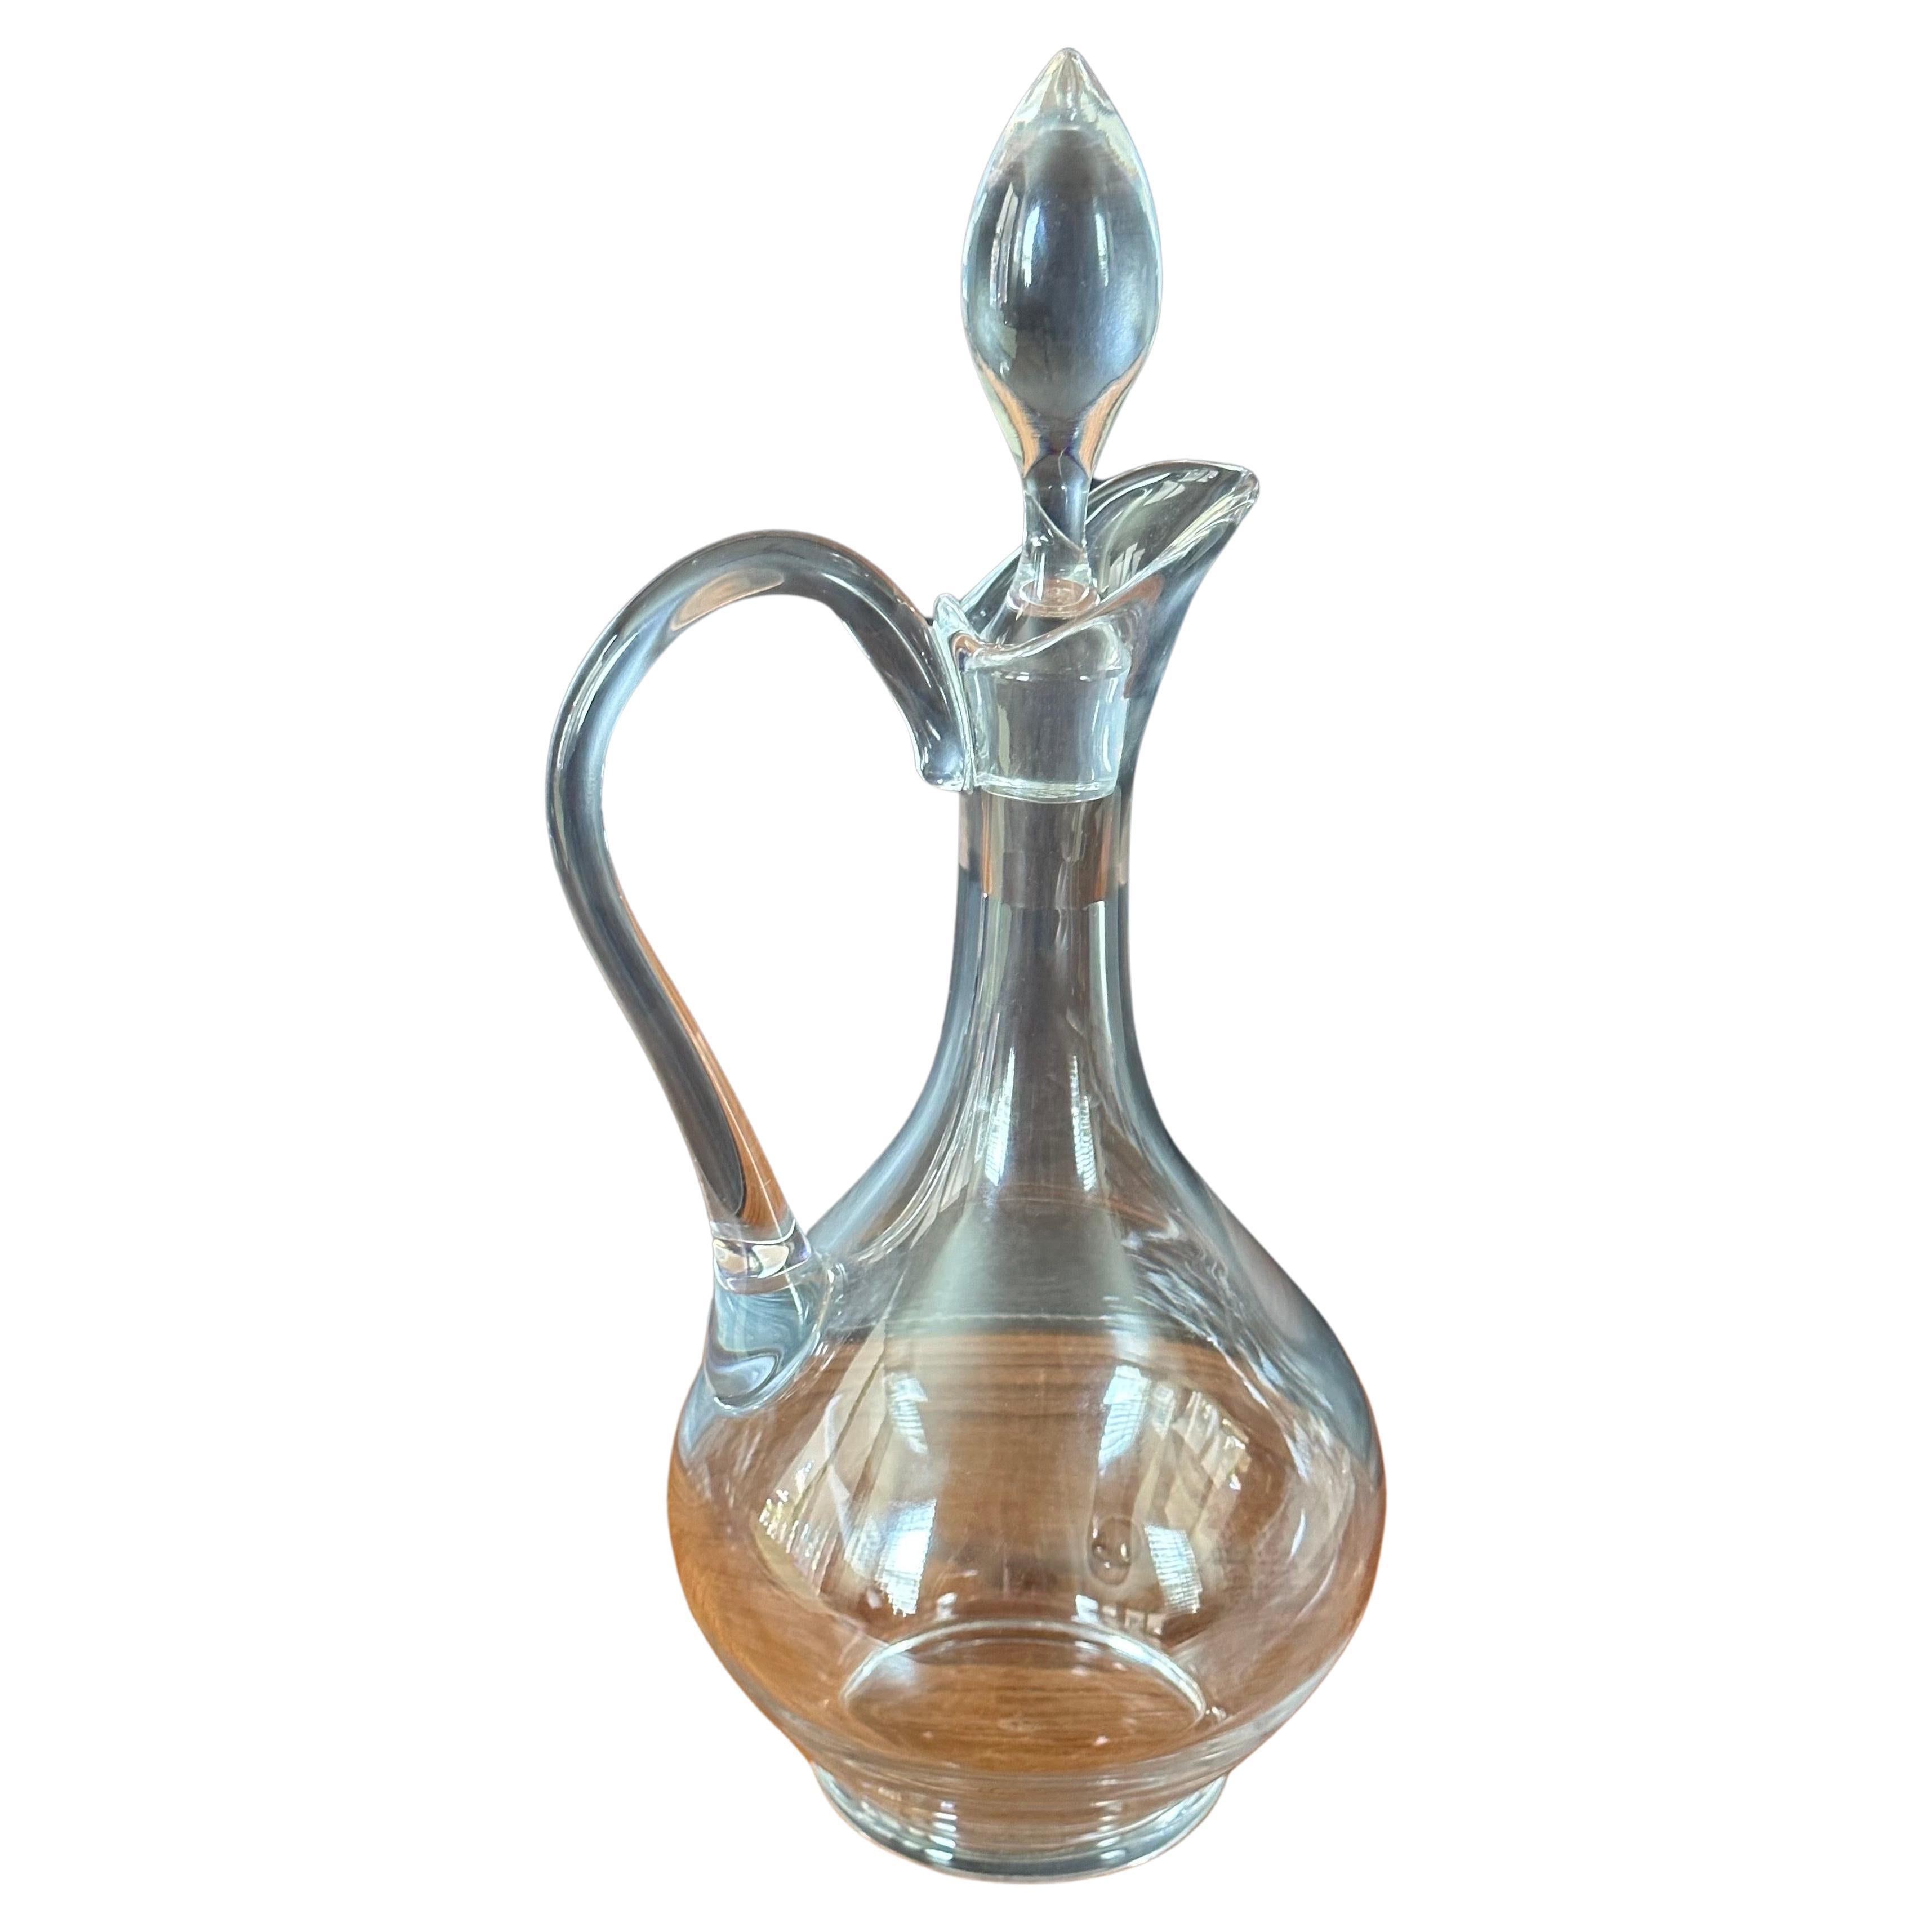 Stunning wine decanter with handle and stopper by Baccarat of France, circa 2000s. The piece is in great condition with no chips or cracks and measures 6.5